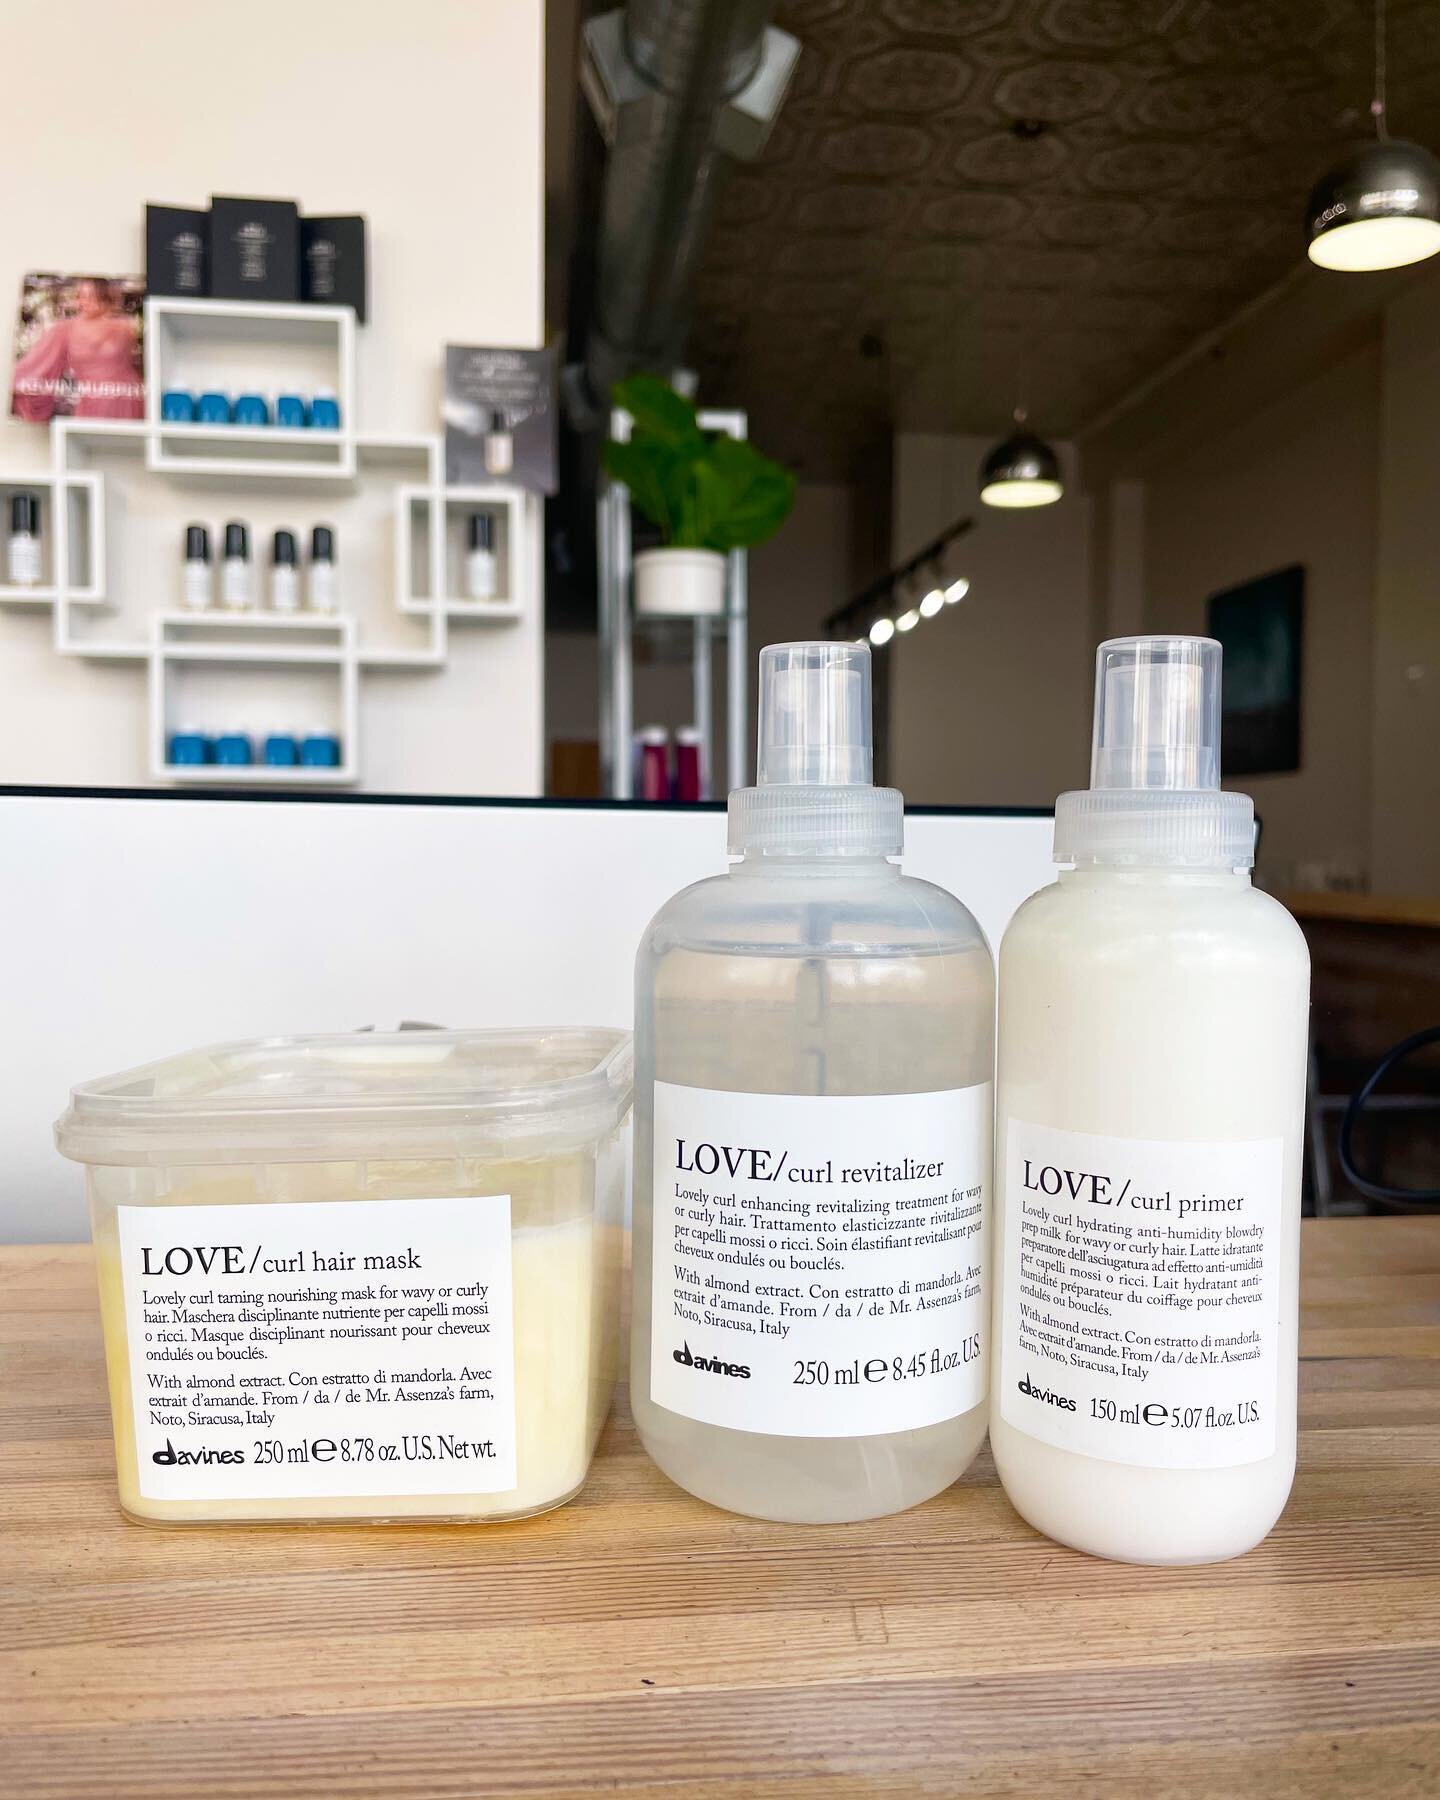 Some products for our curly haired clients!!! The Davines Love Curl line helps nourish &amp; enhance your natural curls! Come pick it up at the salon today💕

.
.
.
#spokanestylist #spokanesalon #pnw #spokanedoesntsuck #spokane #spokanehair #downtown